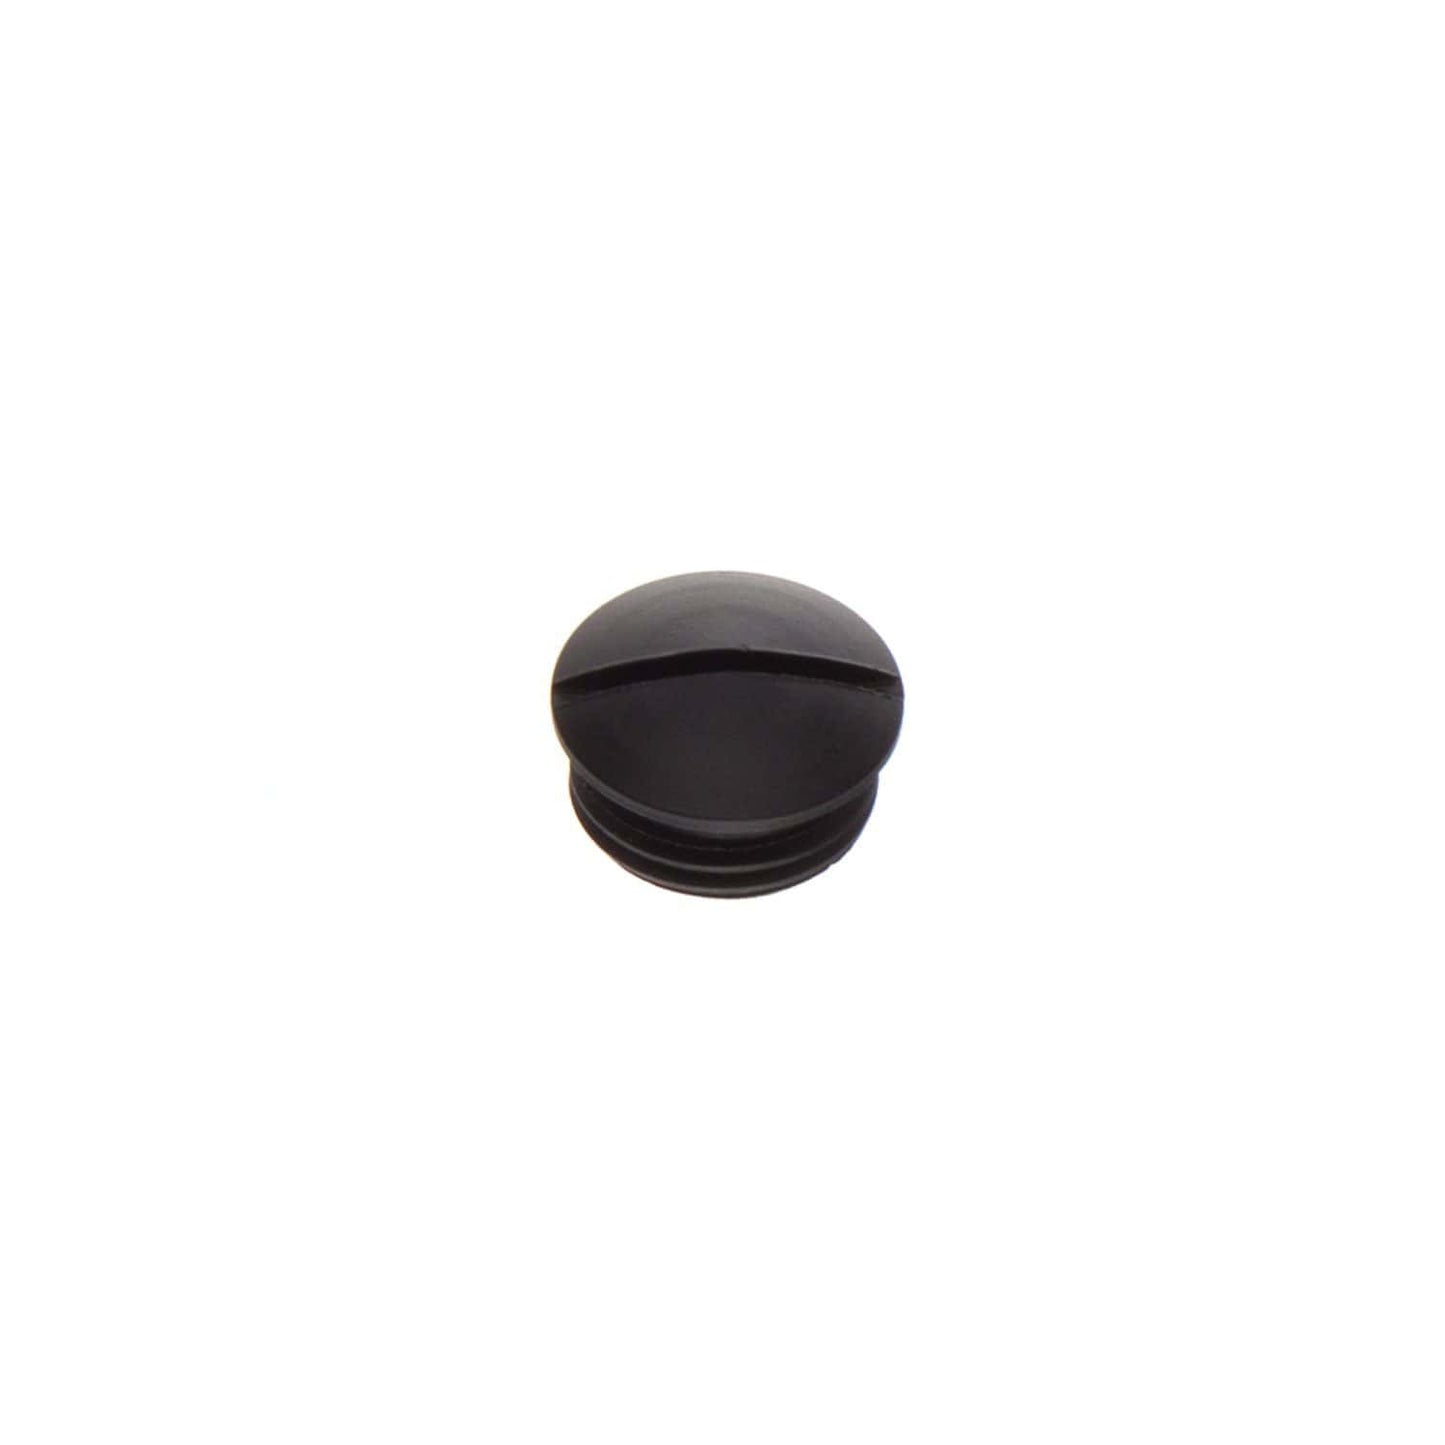 1/8 IPS Cluster Body Plug/Button